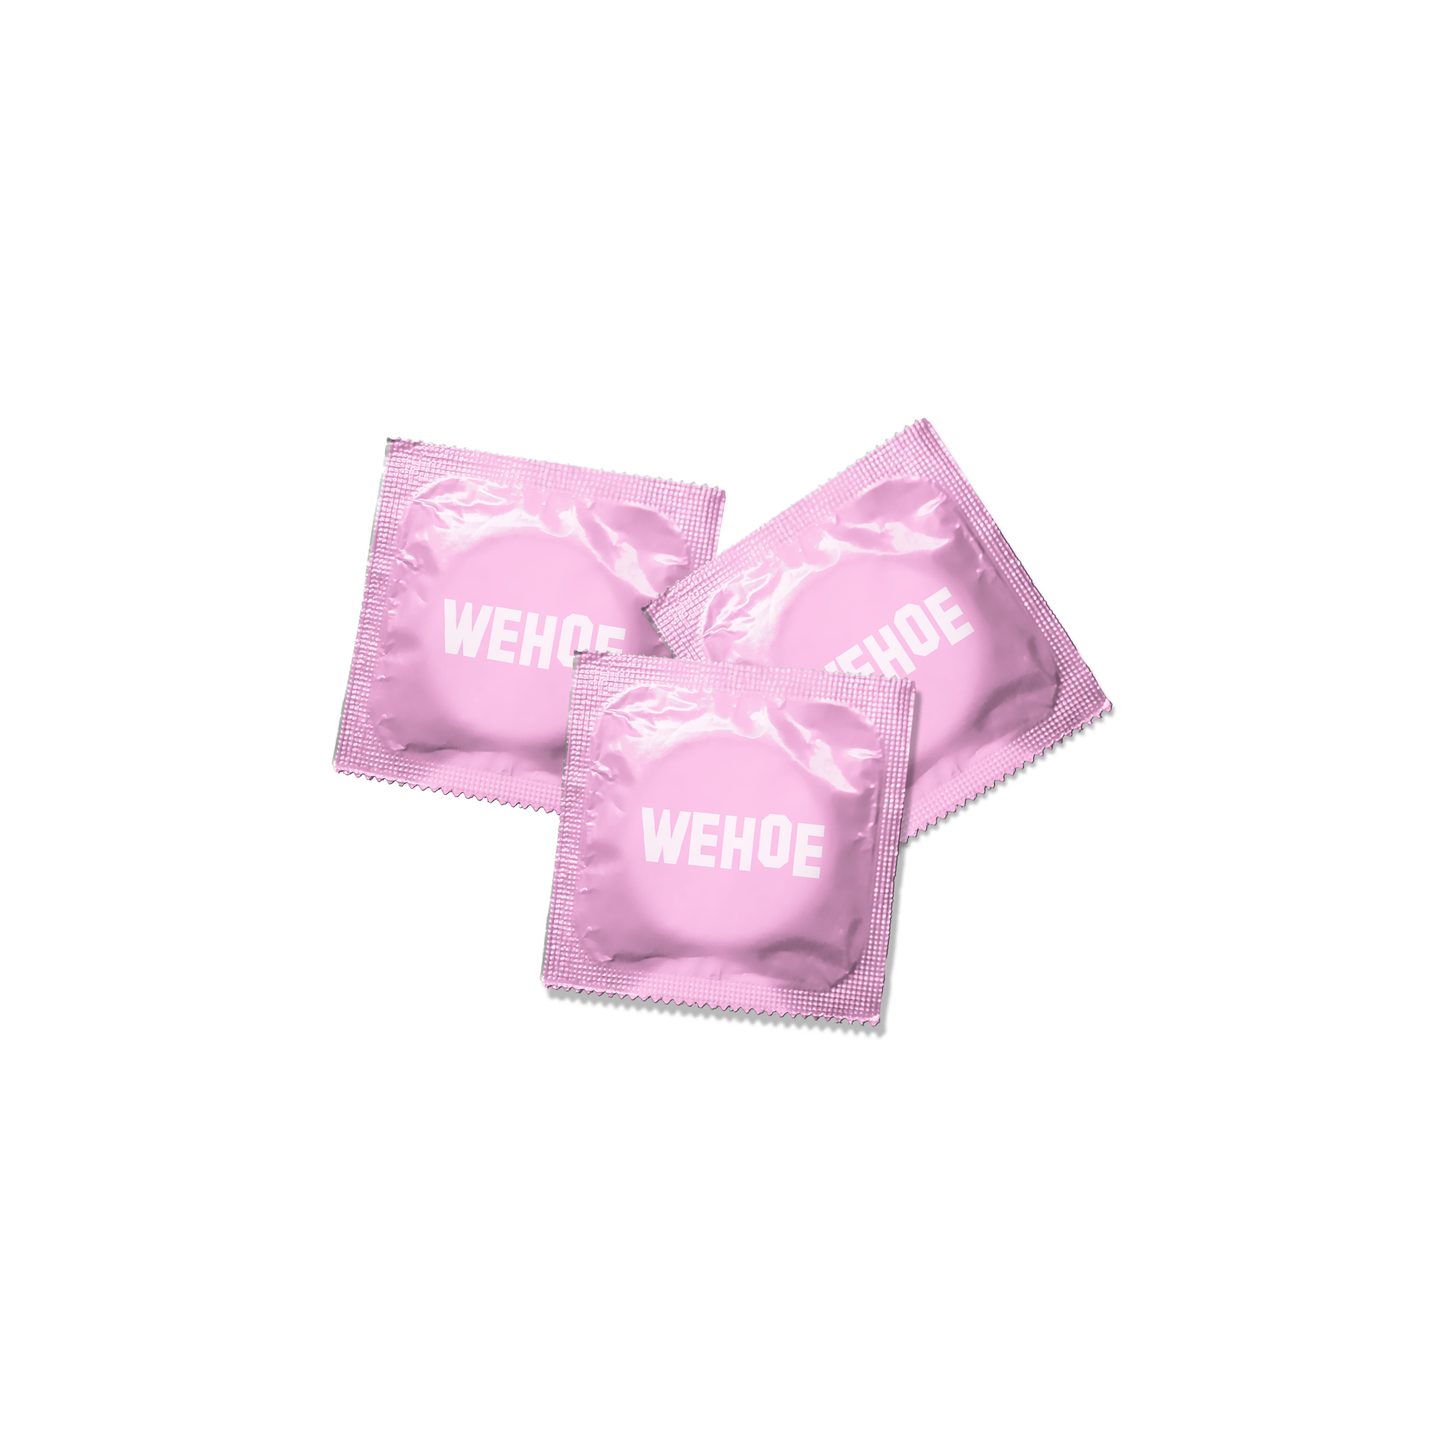 3 PACK OF WEHOE CONDOMS